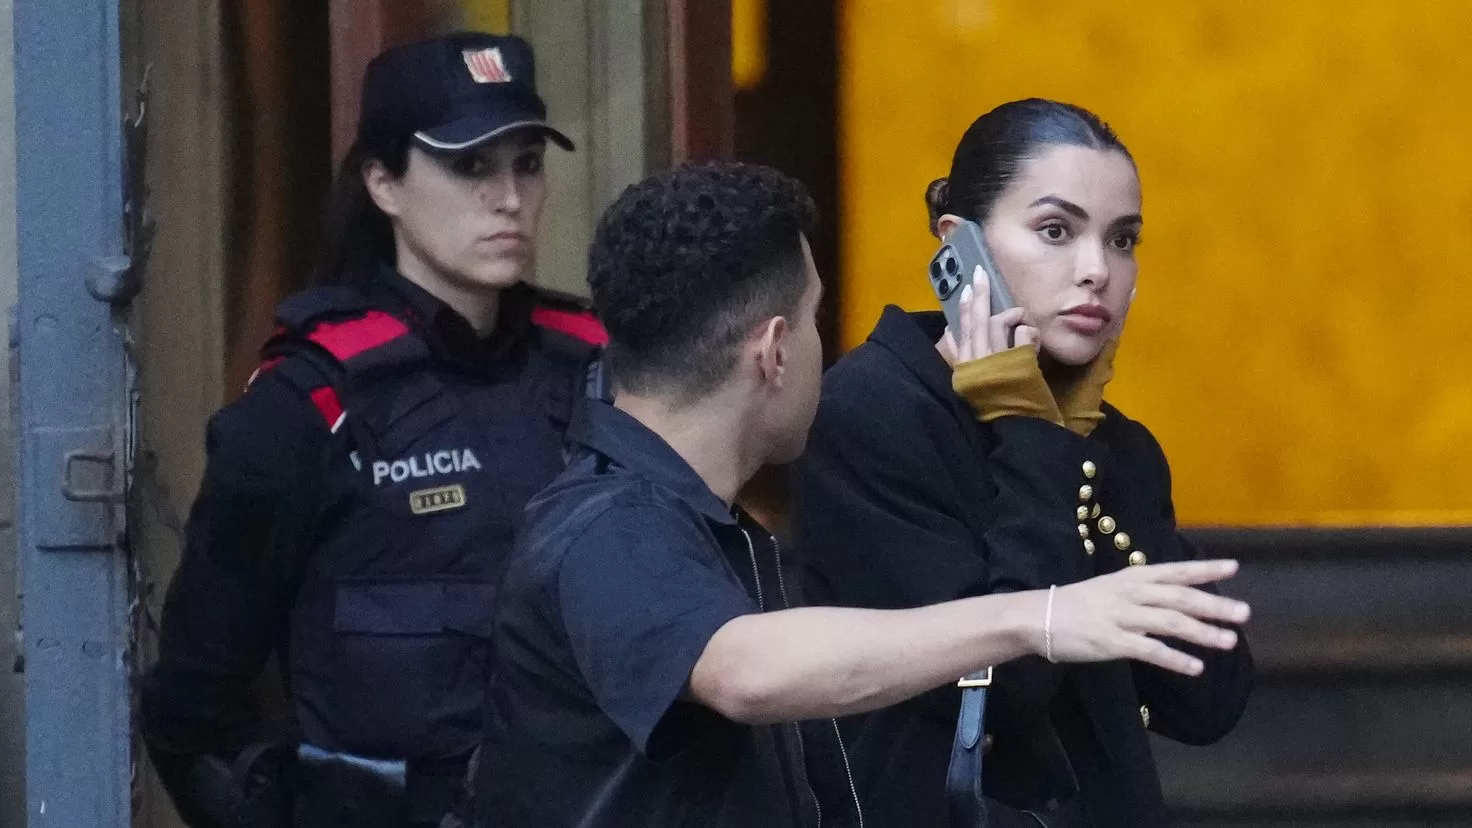 This is the relationship between Dani Alves and Joana Sanz after the trial for sexual assault
